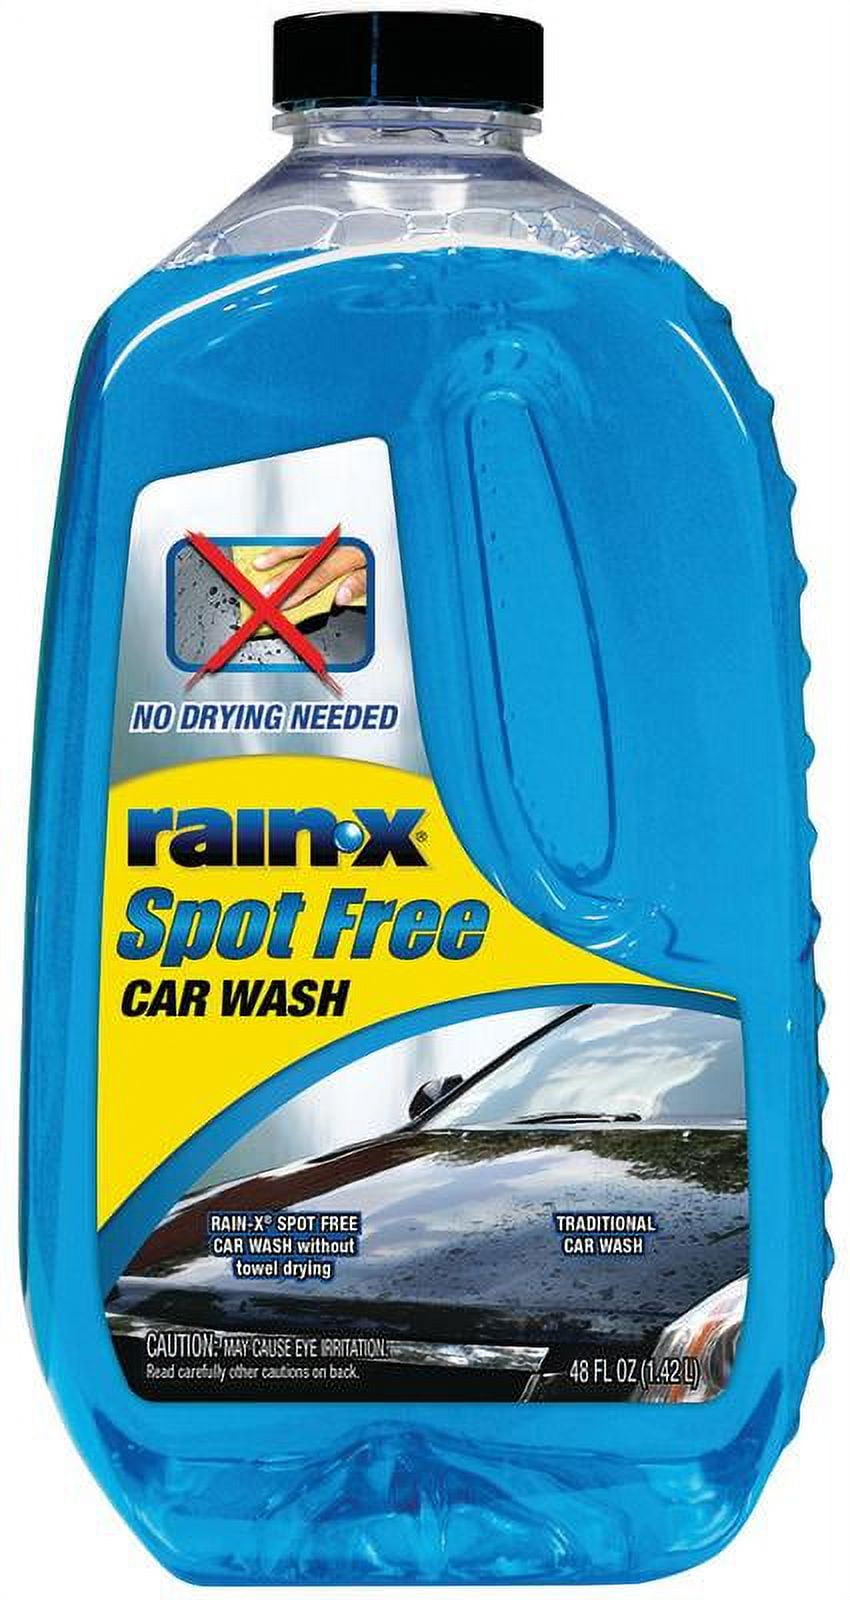 $15 SPOT FREE CAR WASH Filter??  SPOT FREE WATER FOR WASHING YOUR